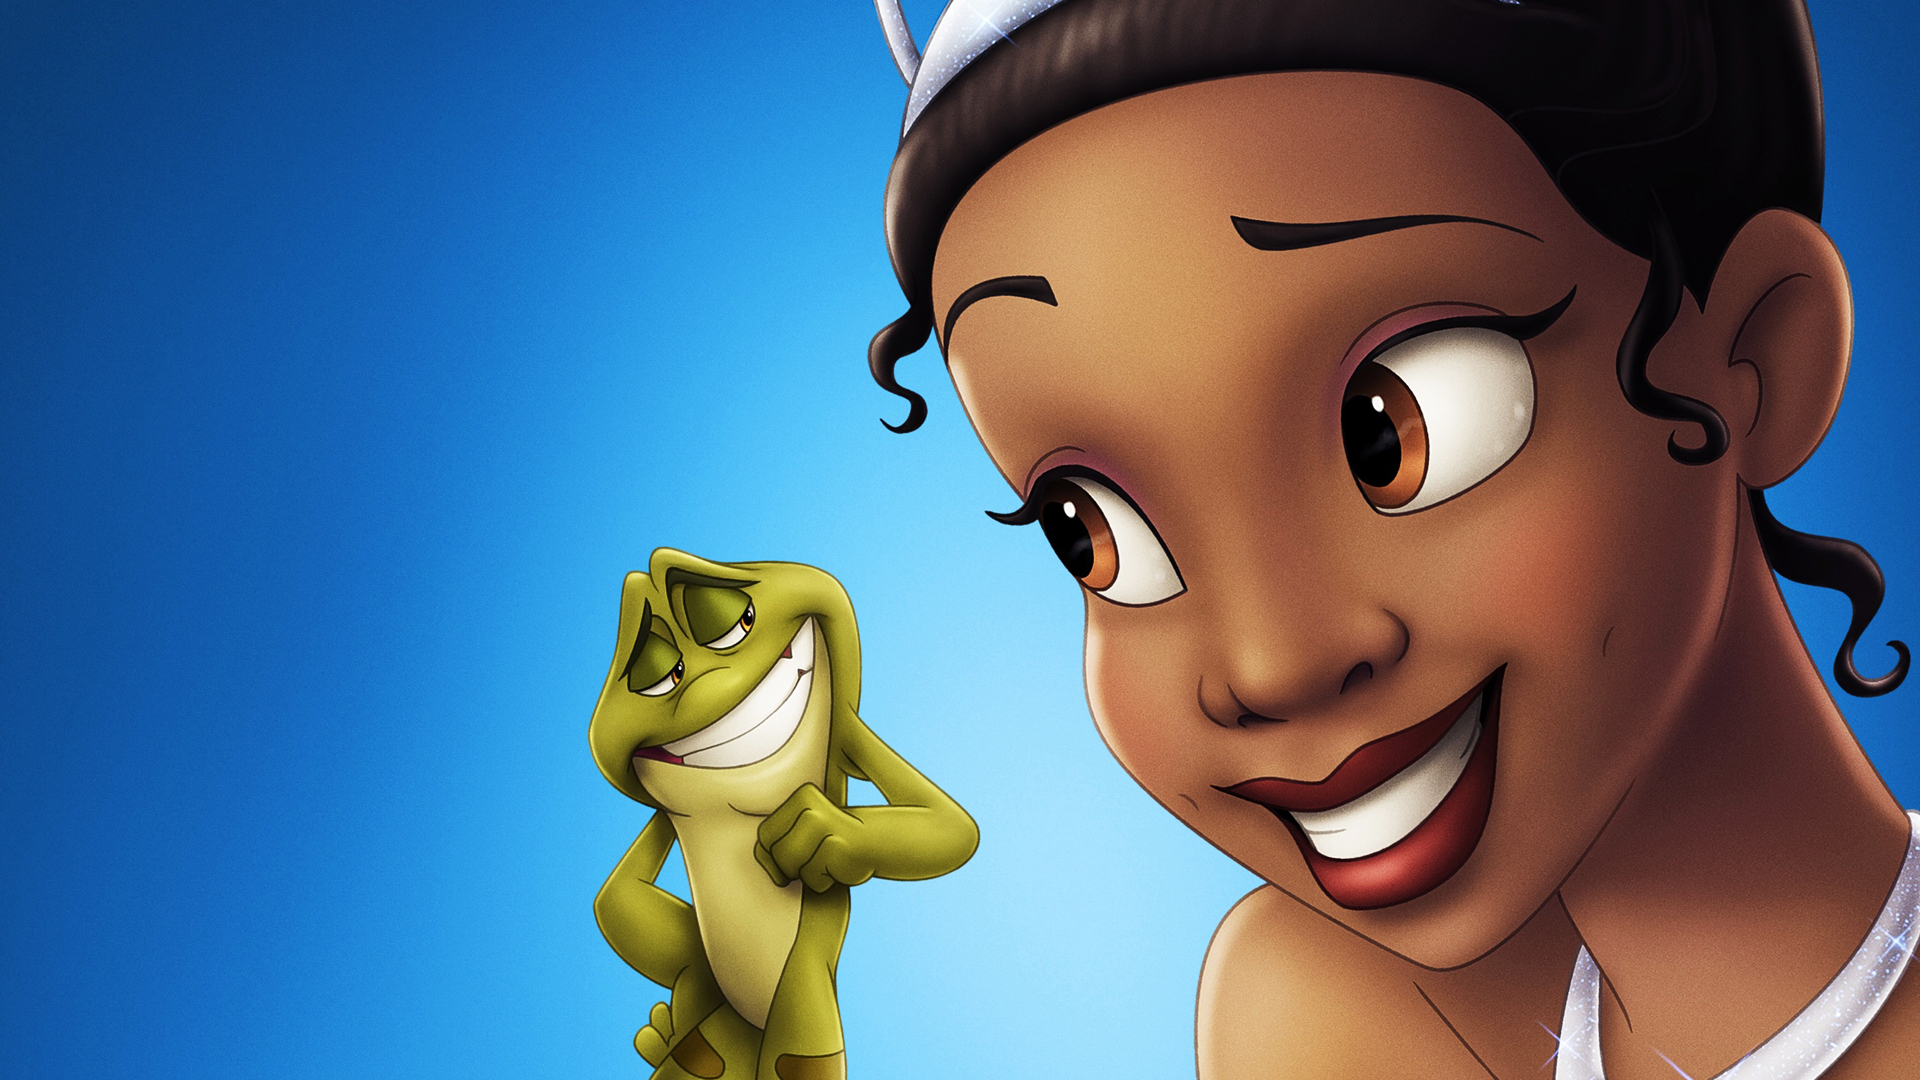 1920x1080 Free download Anime and Animated The princess and the frog HD wallpaper [] for your Desktop, Mobile \u0026 Tablet | Explore 50+ Princess and the Frog Wallpaper | HD Frog Wallpaper